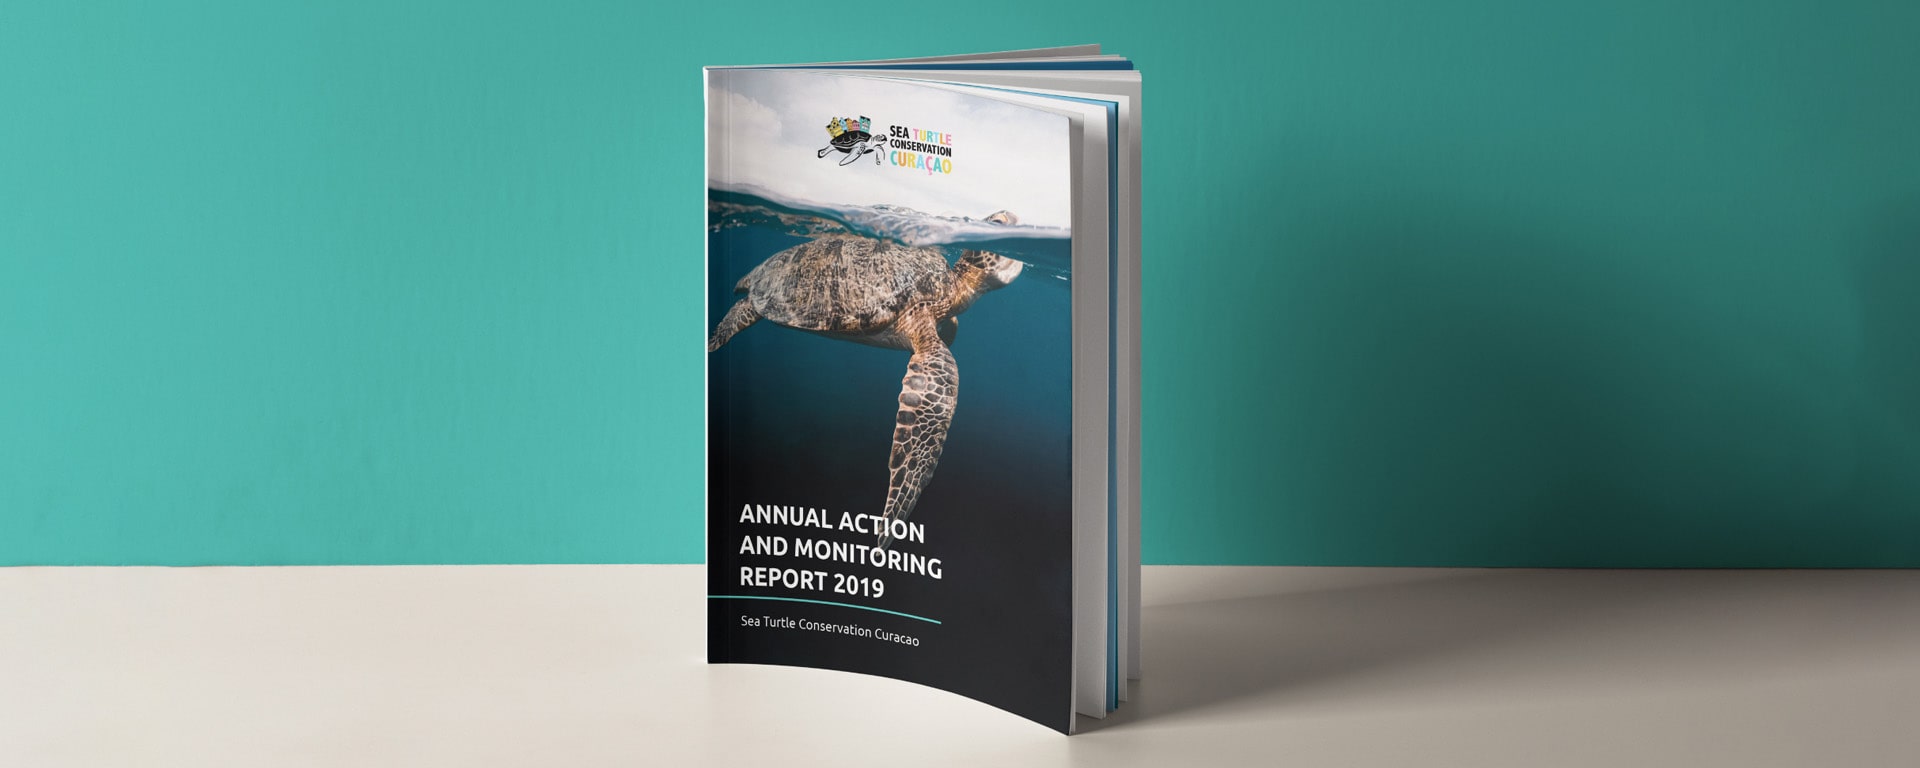 Annual Report design for Sea Turtle Conservation Curacao by Marketing Orchestra